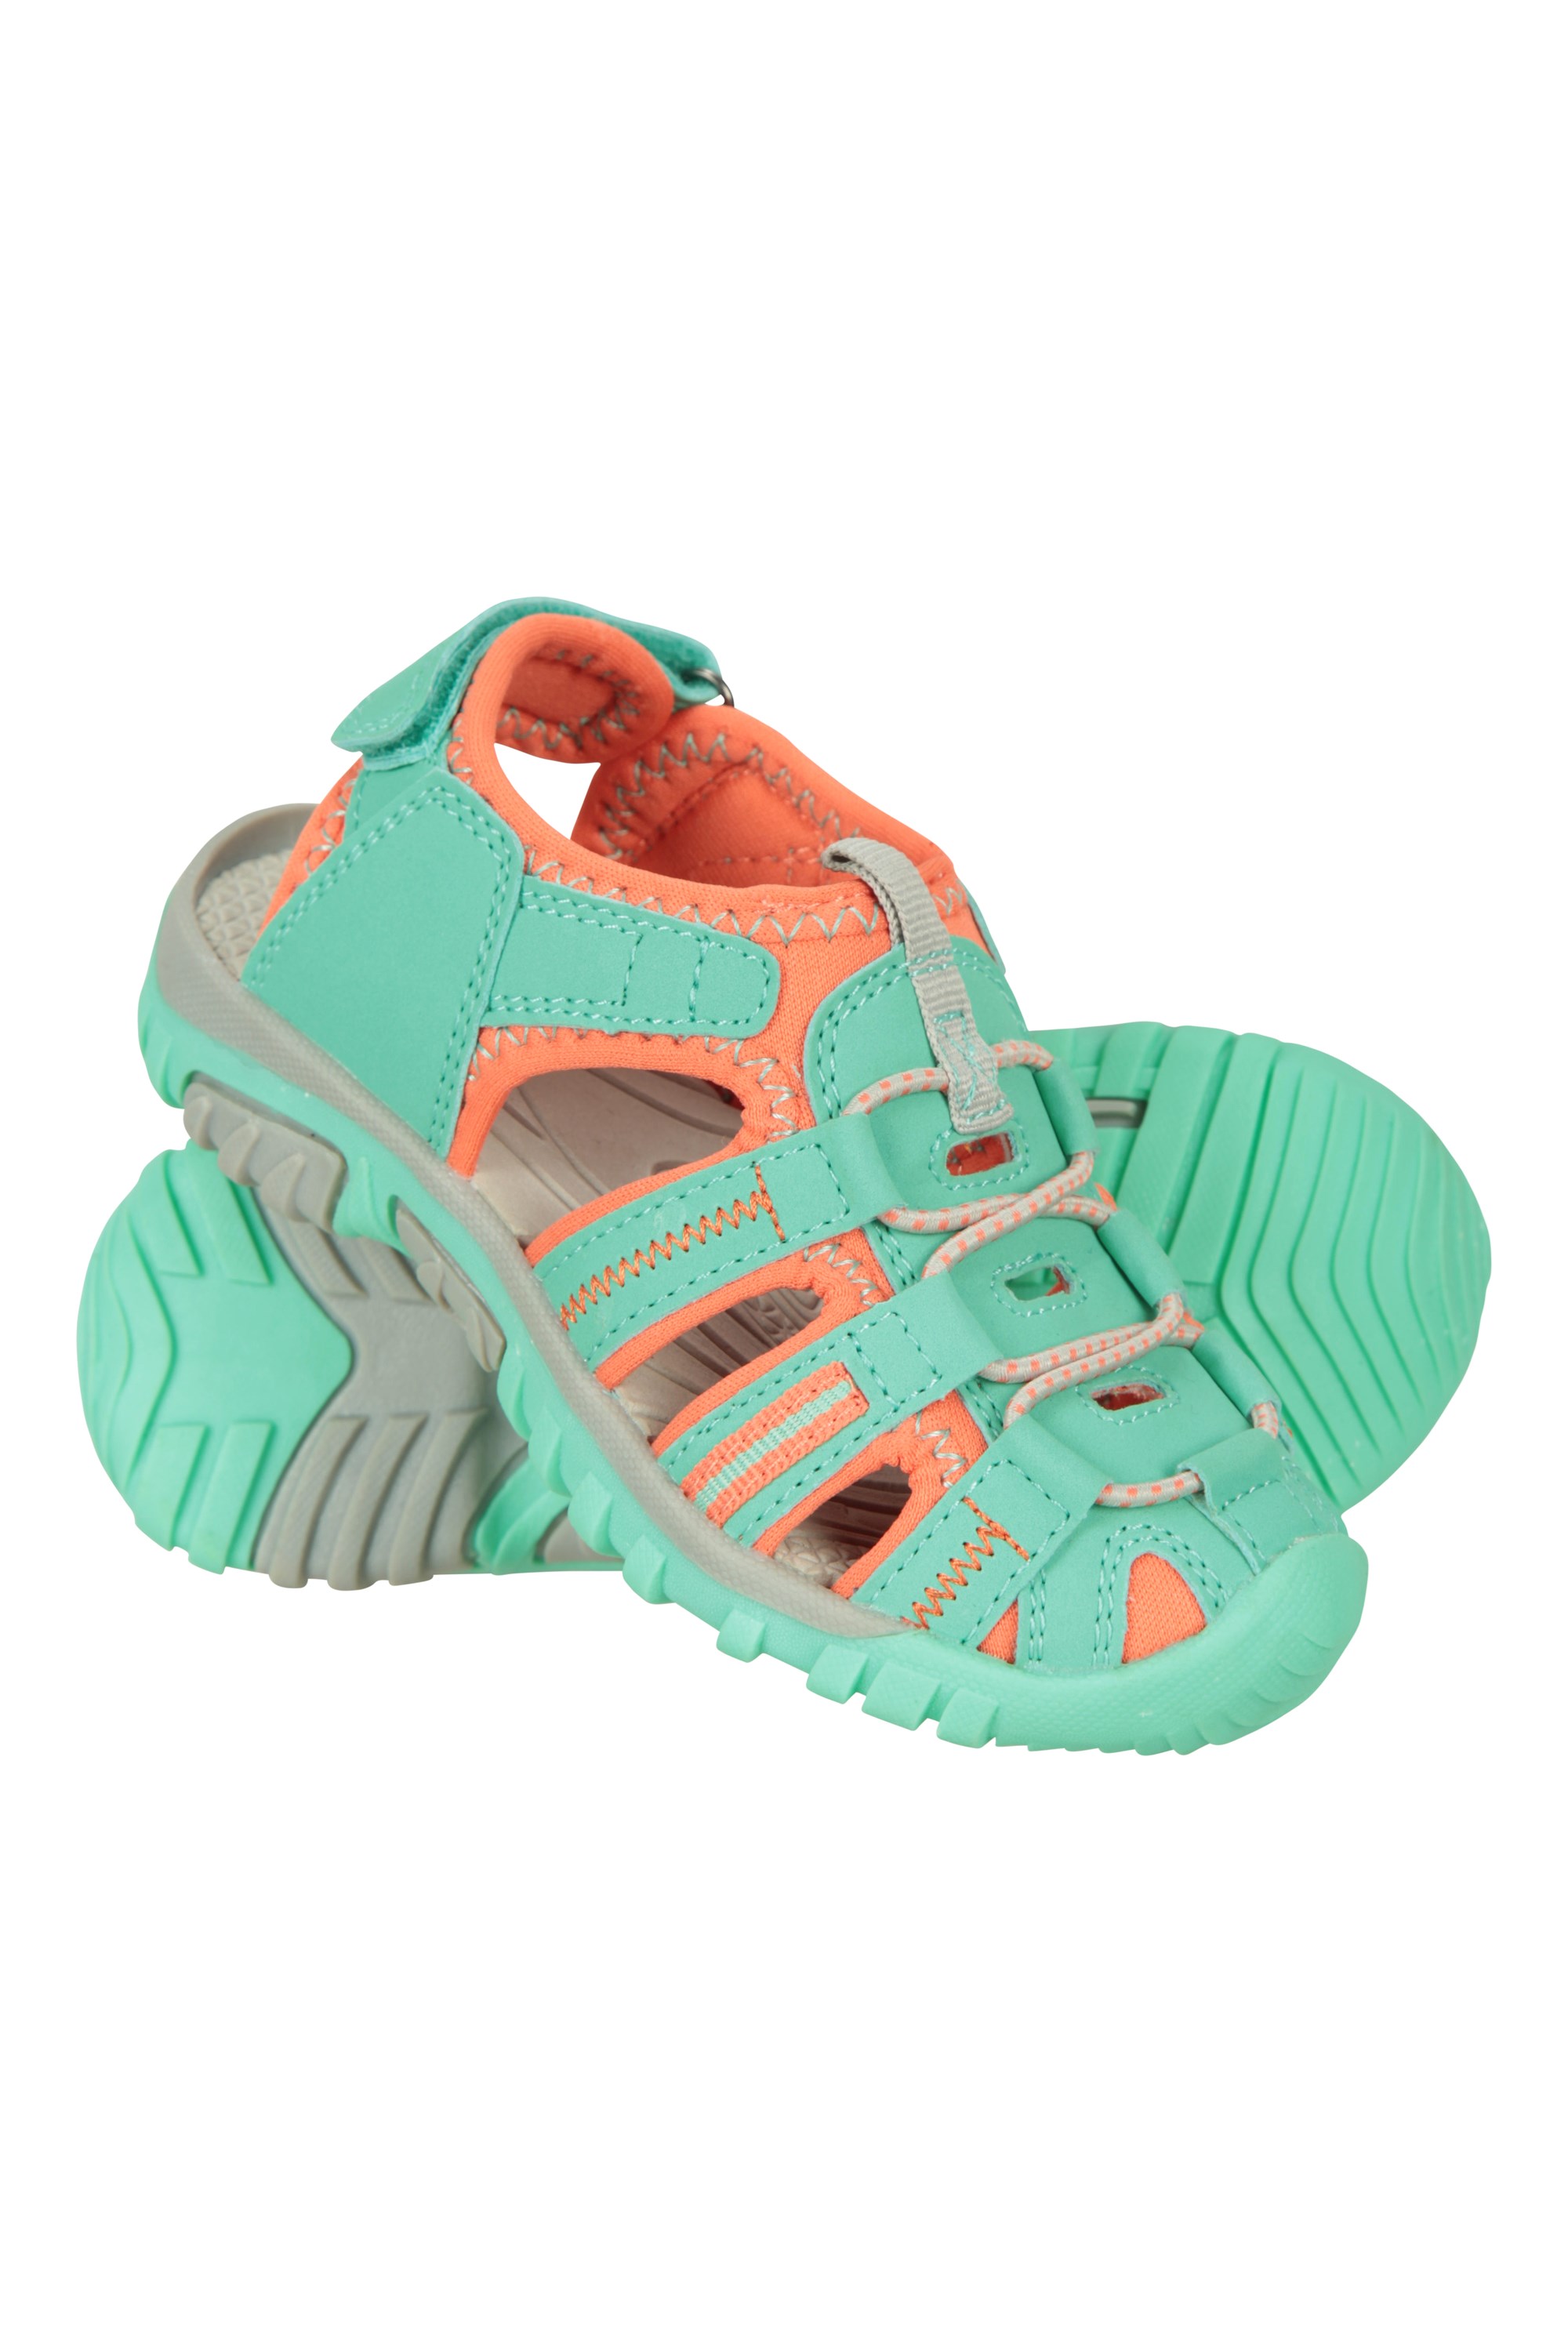 Neoprene Shoes Sandals Mountain Warehouse Bay Kids Shandals Footwear for Walking Travelling Midsole Adjustable Summer Shoes Comfortable Childrens Beach Shoes 